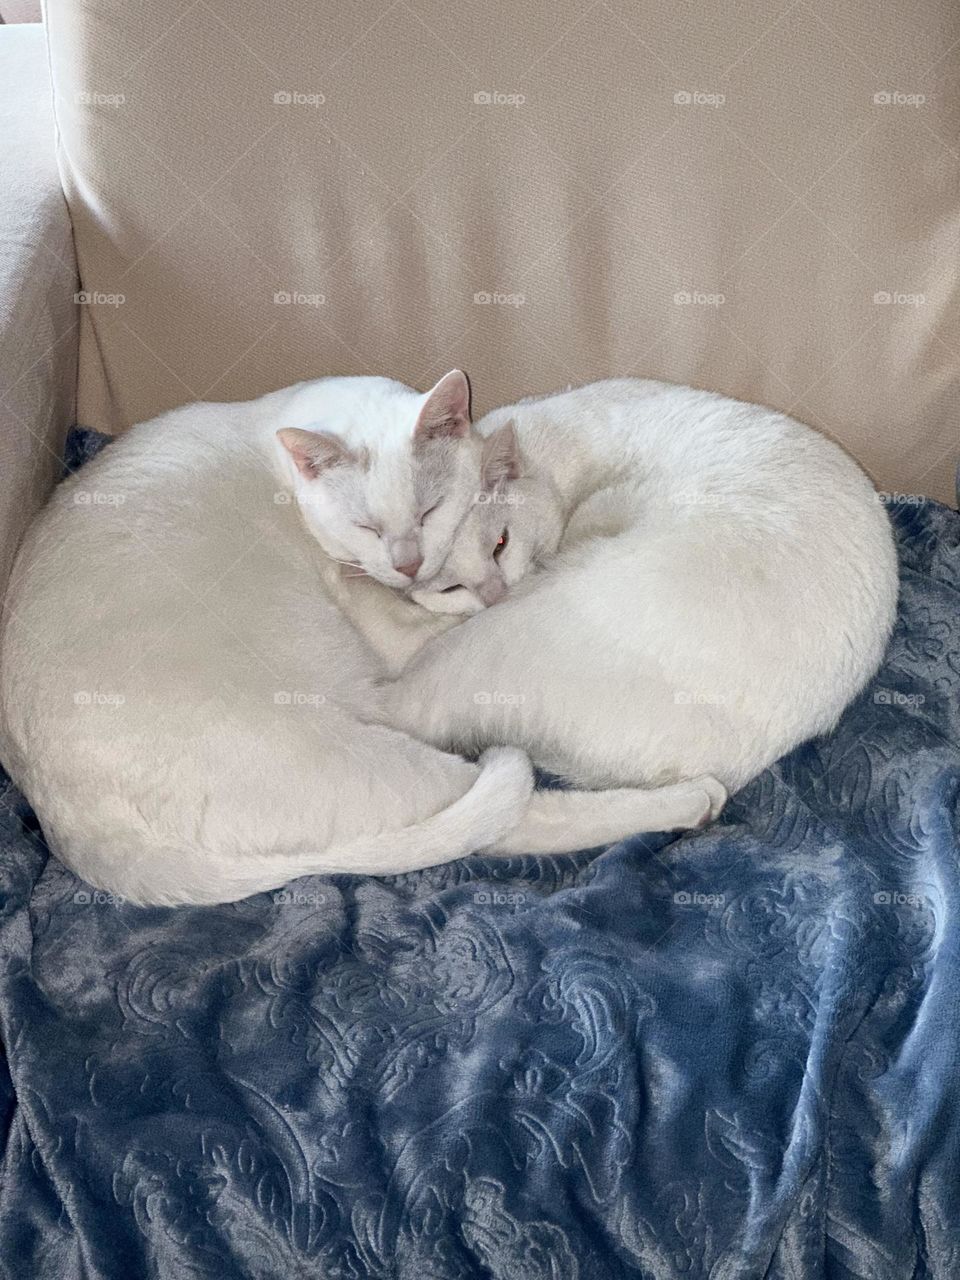 Our two cats curled up in a cute circle warming each other up